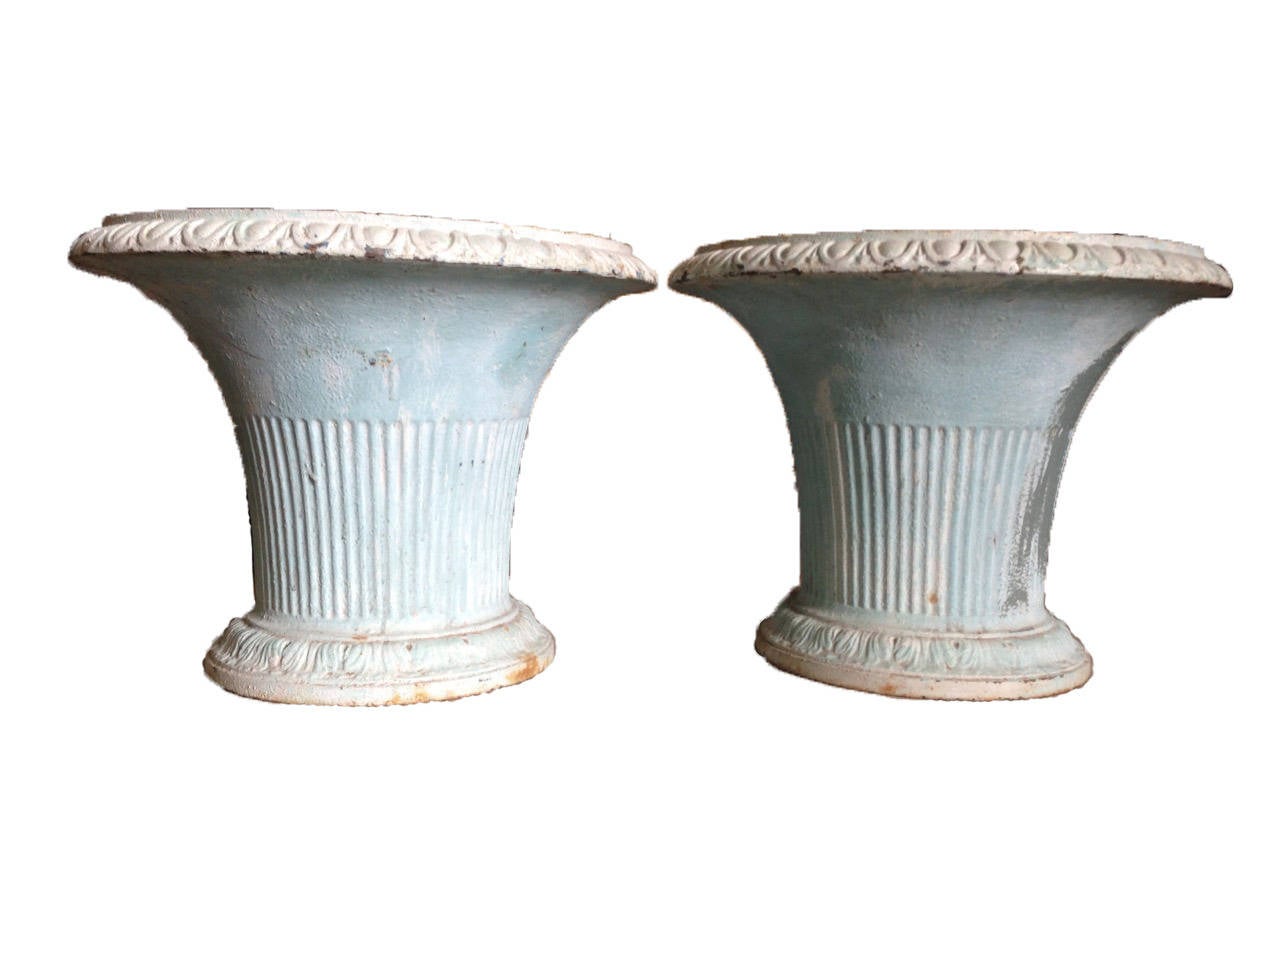 Pair of 19th century French iron jardinières with stunning blue patina. One jardinière has a stain on one side consistent with exterior use.